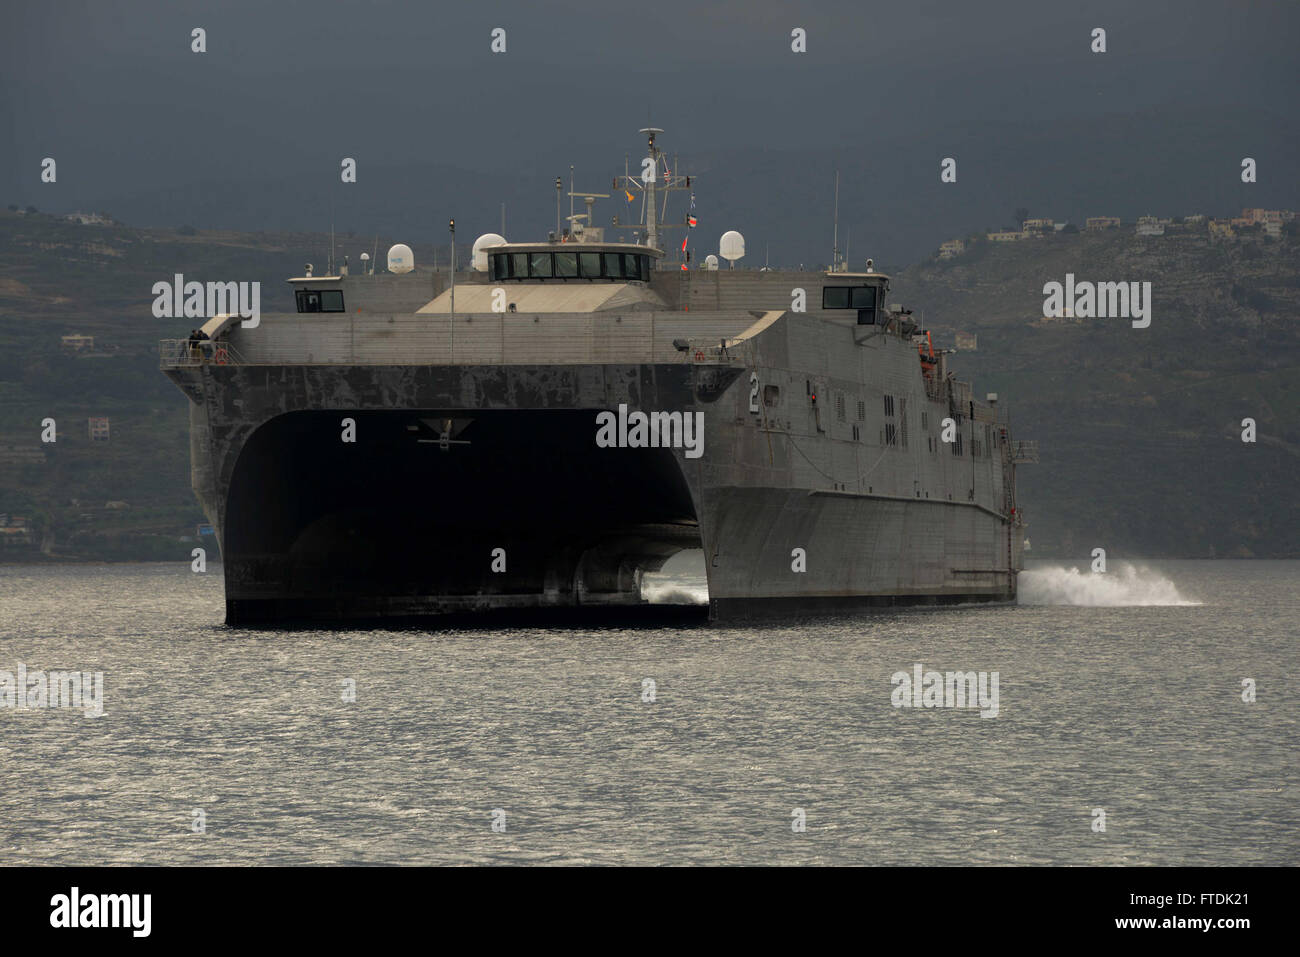 151230-N-IL474-052  SOUDA BAY, Greece (Dec. 30, 2015) – The Military Sealift Command Expeditionary Fast Transport ship , USNS Choctaw County (T-EPF 2), arrives in Souda Bay for a scheduled port visit Dec. 30, 2015.  Choctaw County is the second of 10 vessels designed for rapid intra-theater transportation of troops and military equipment.  (U.S. Navy photo by Heather Judkins/Released) Stock Photo